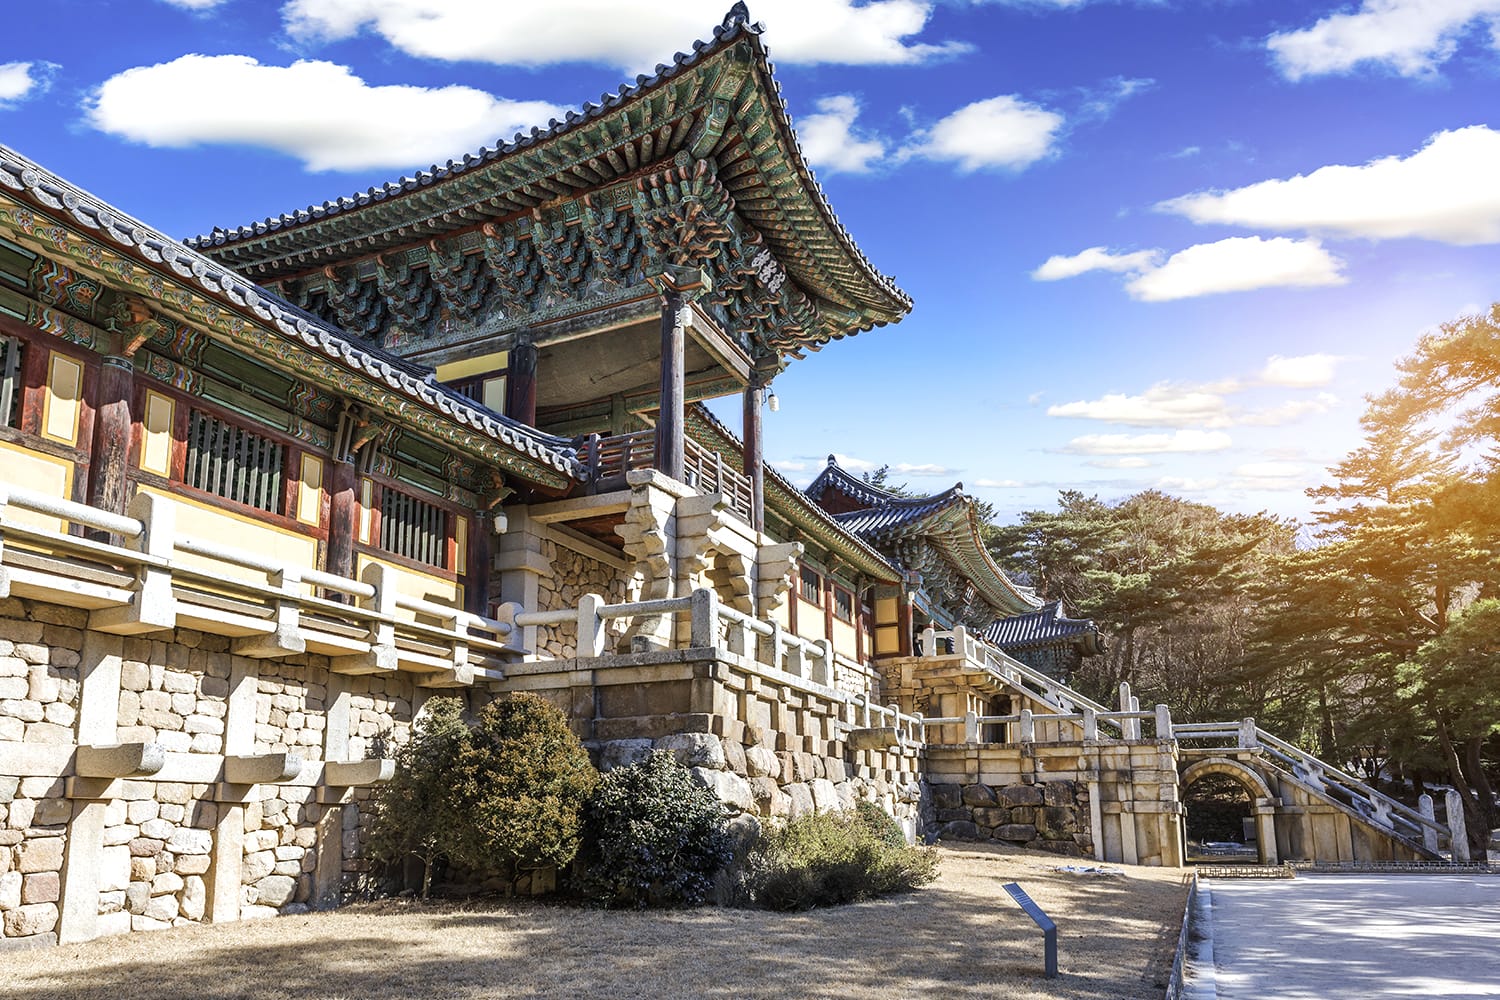 Bulguksa Temple is one of the most famous Buddhist temples in all of South Korea and a UNESCO World Heritage Site.